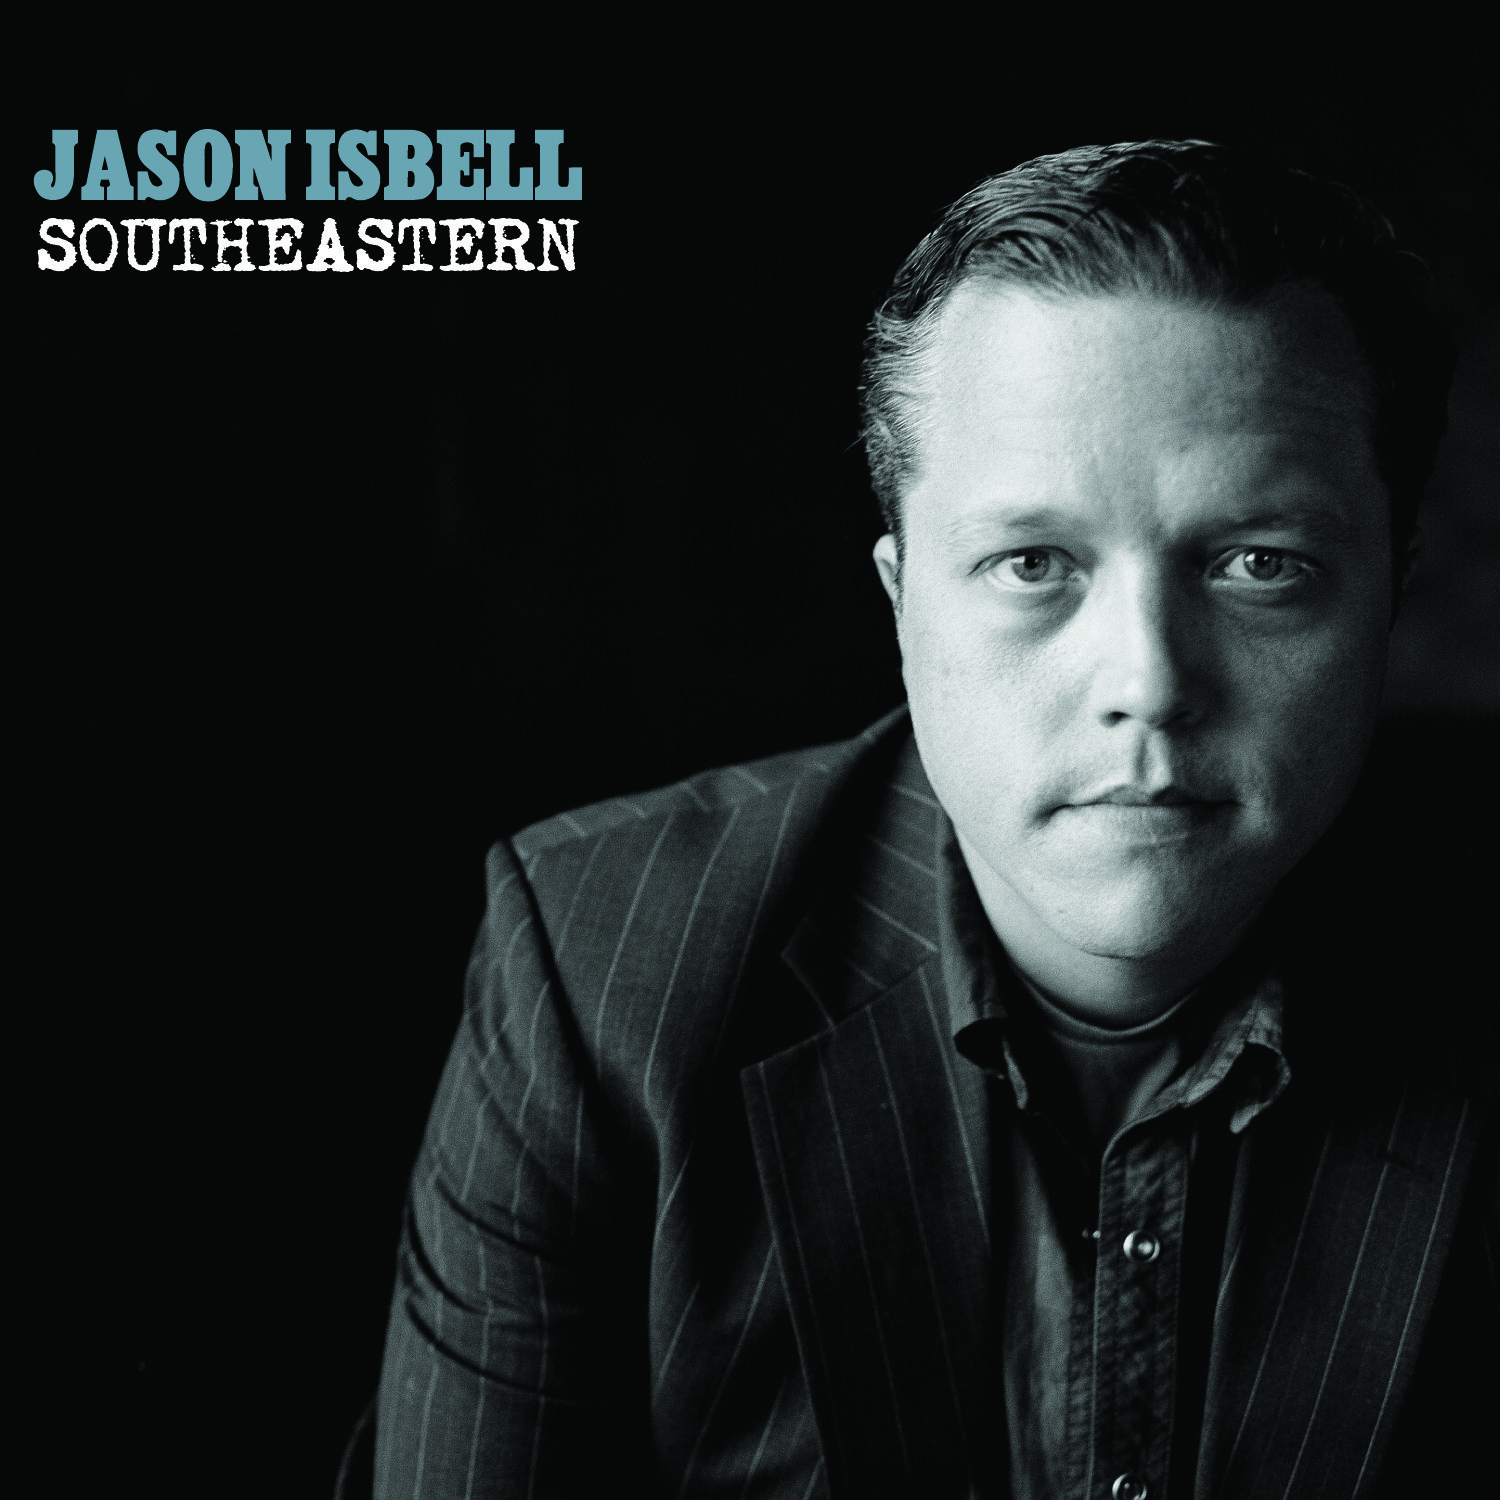 Jason Isbell, “Cover Me Up”